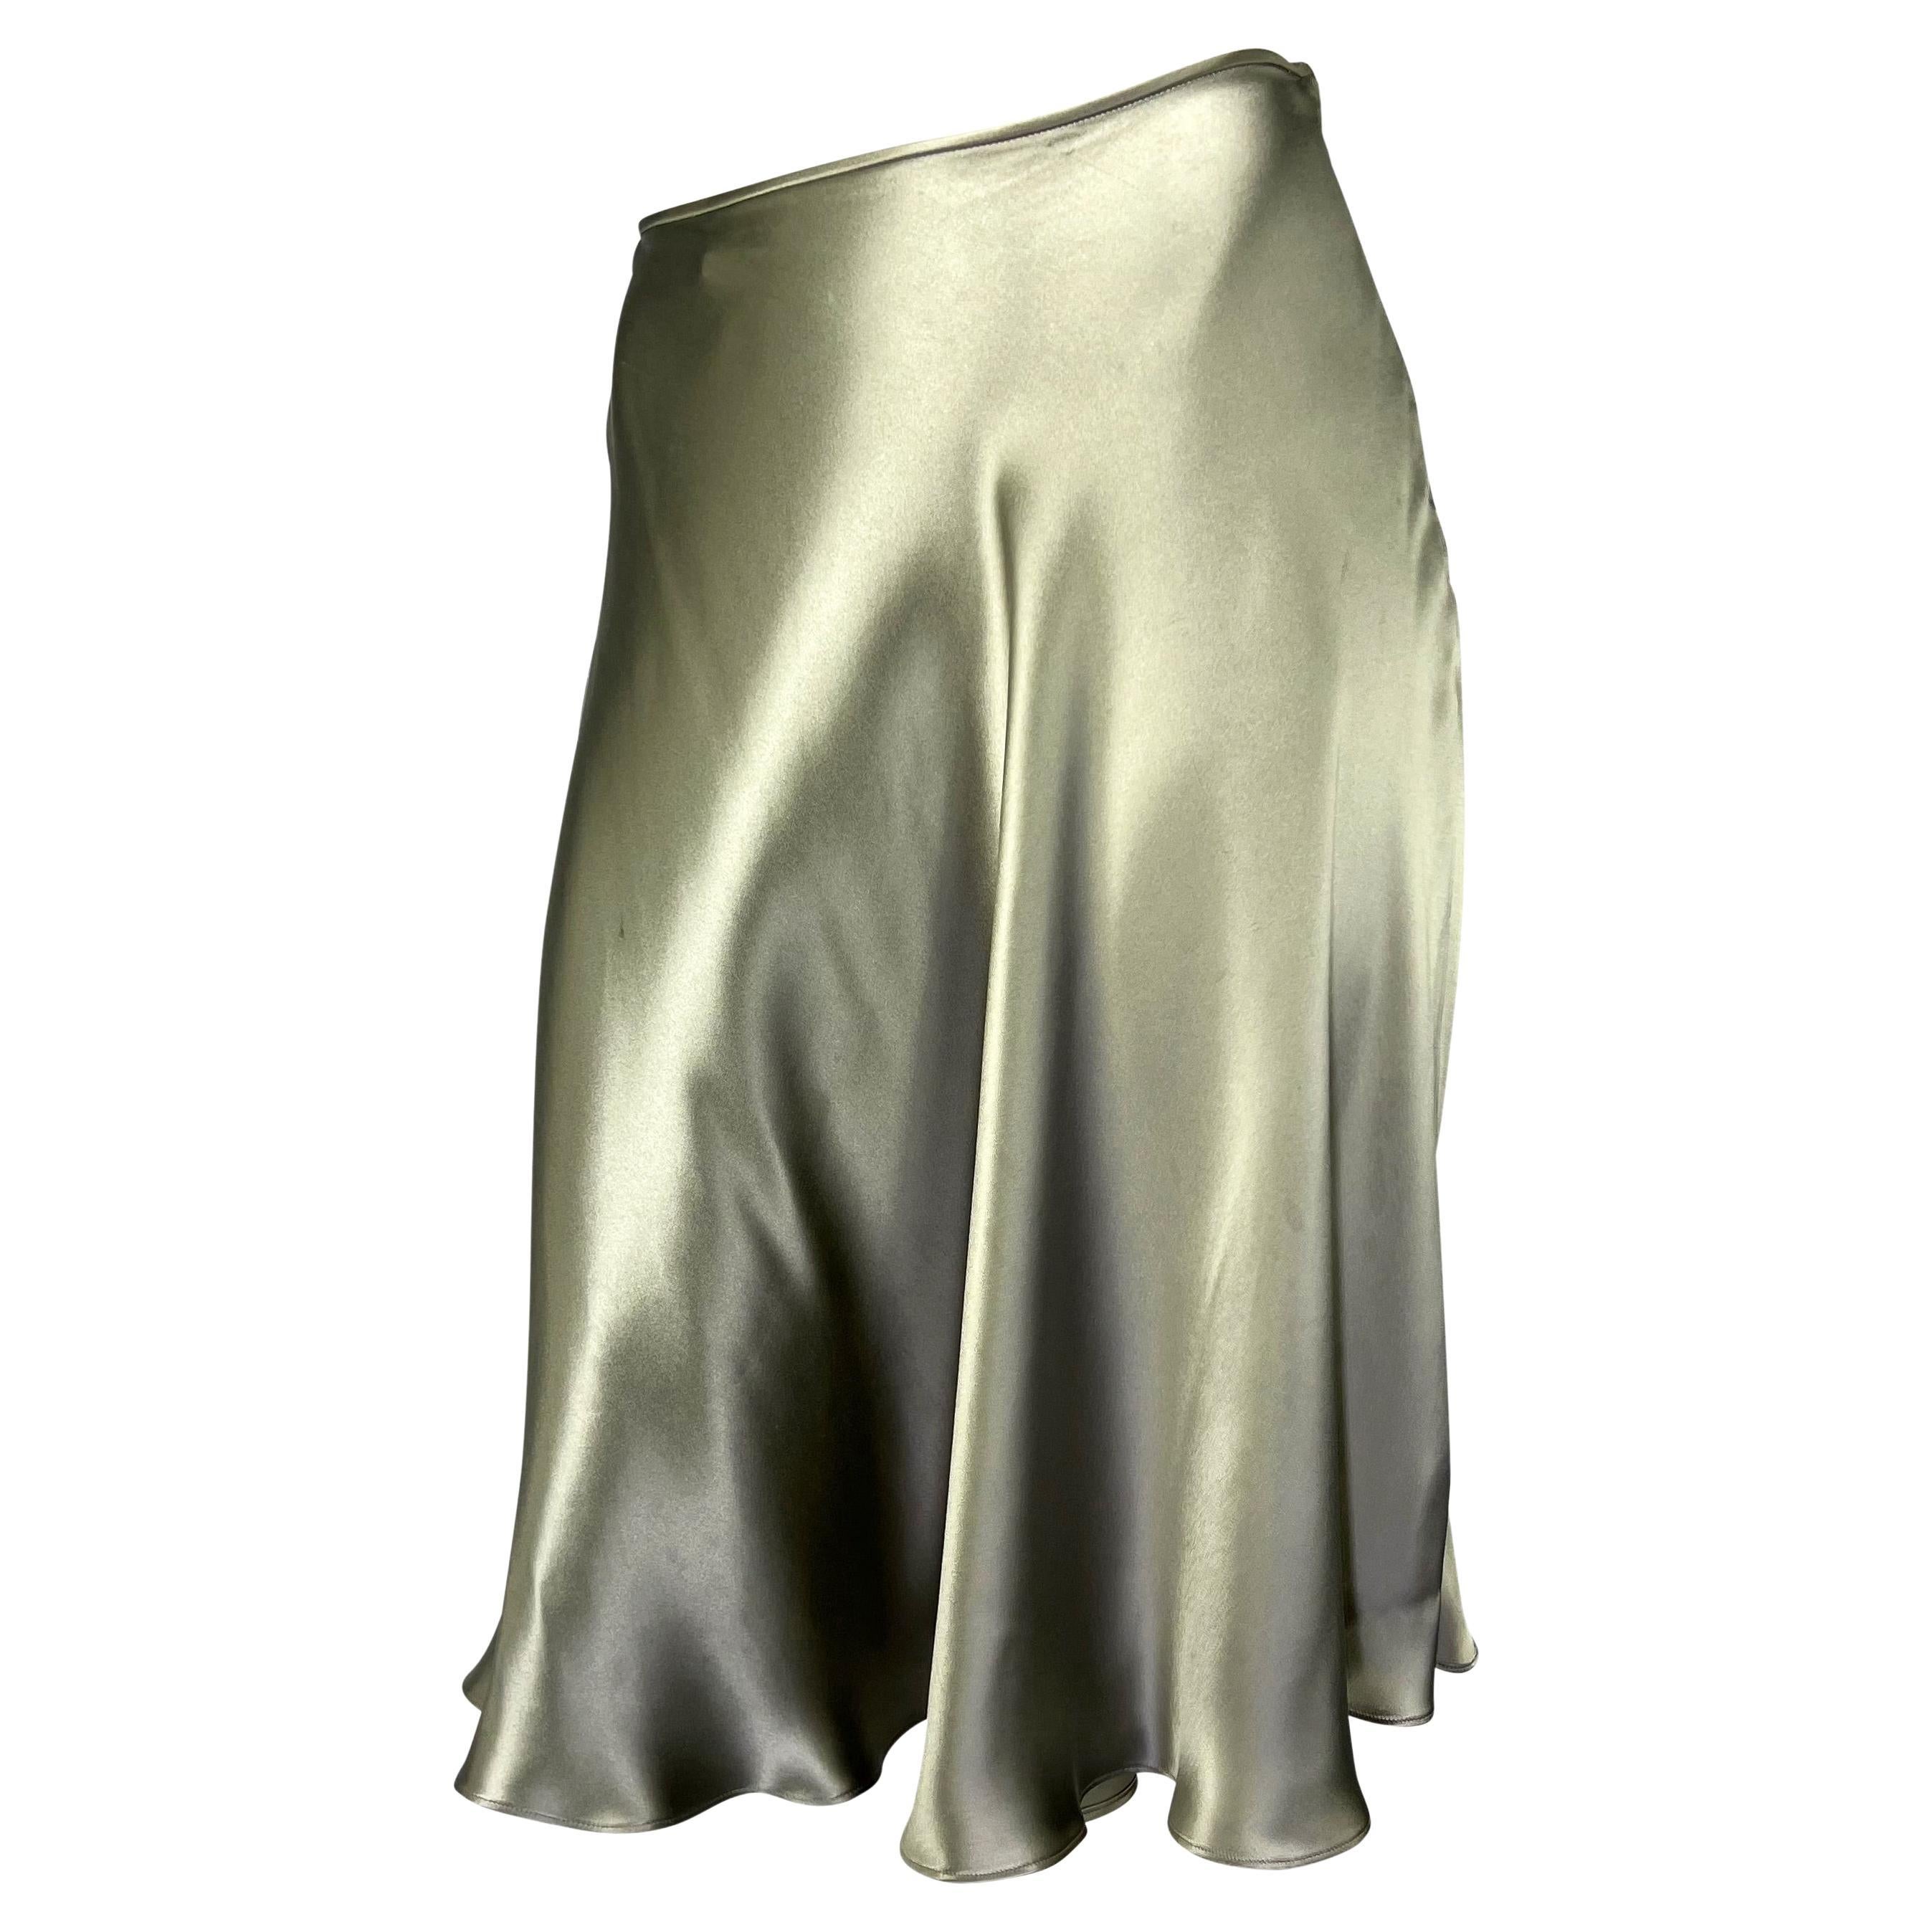 TheRealList presents: a shining silver Gucci skirt designed by Tom Ford. From the Spring/Summer 2000 collection, this silk satin skirt features a flare cut. The perfect piece to bring shimmer to any ensemble, this skirt encapsulates Ford's masterful